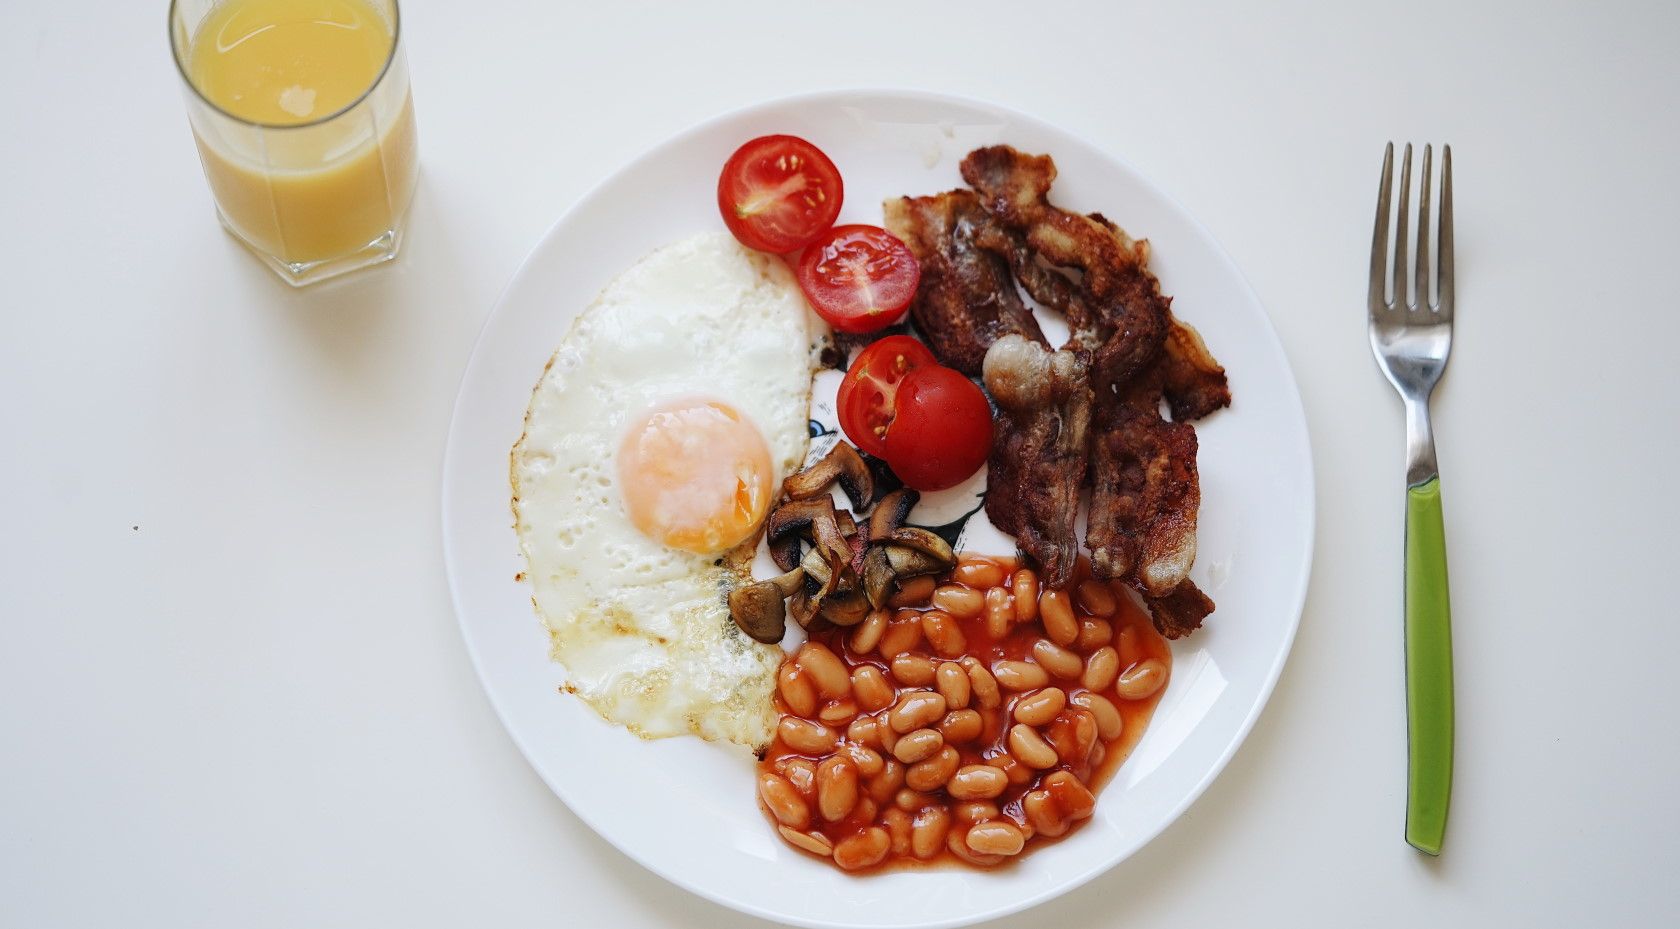 plate of bacon eggs and beans on table next to fork and juice